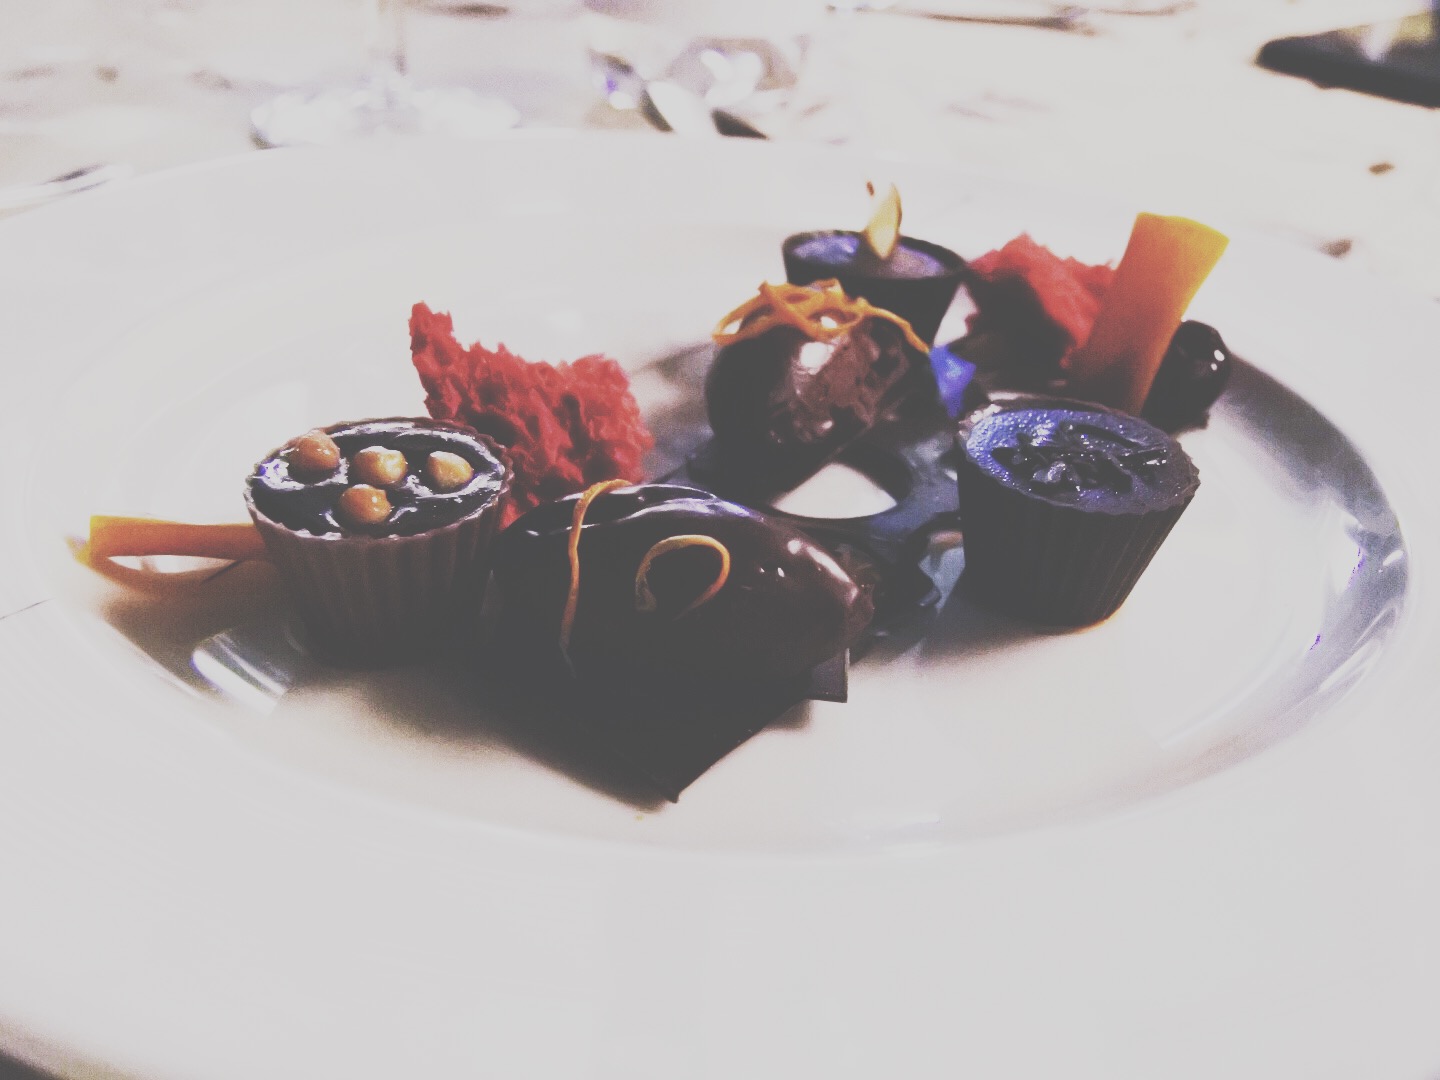 The chocolate cups prettily presented